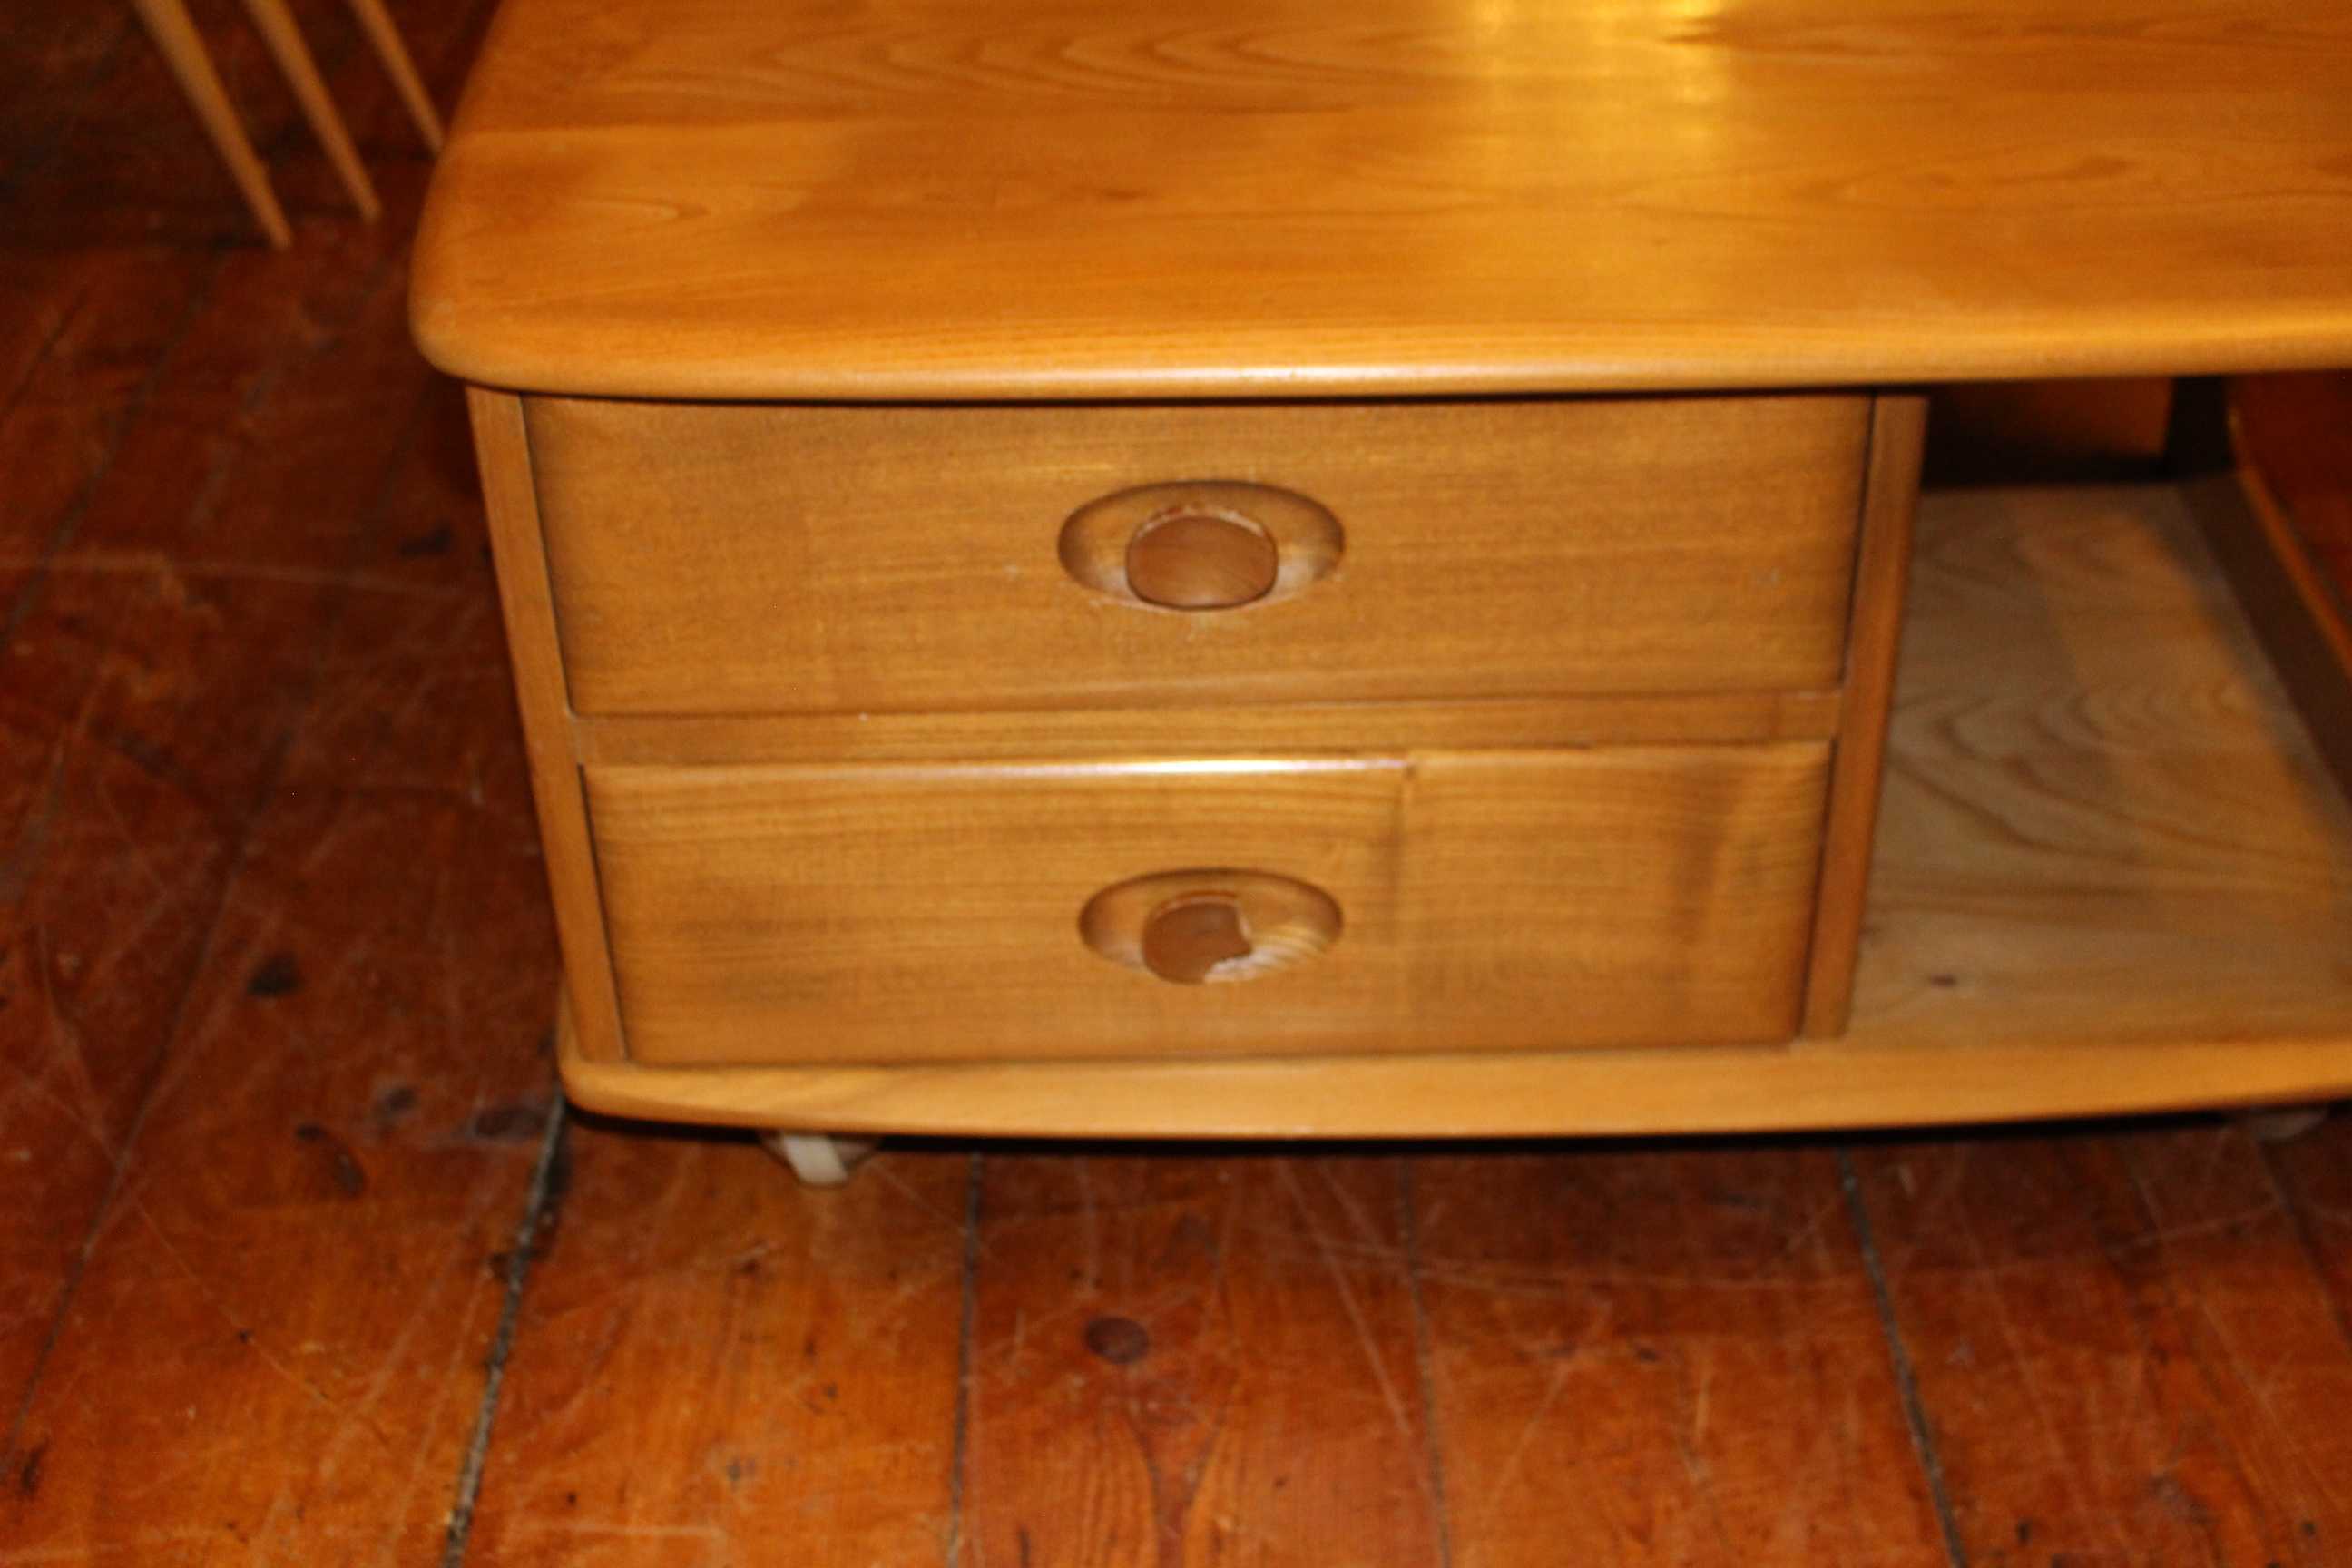 Ercol Pandoras box TV table very good used condition but one the draw knobs is broken. - Image 5 of 5